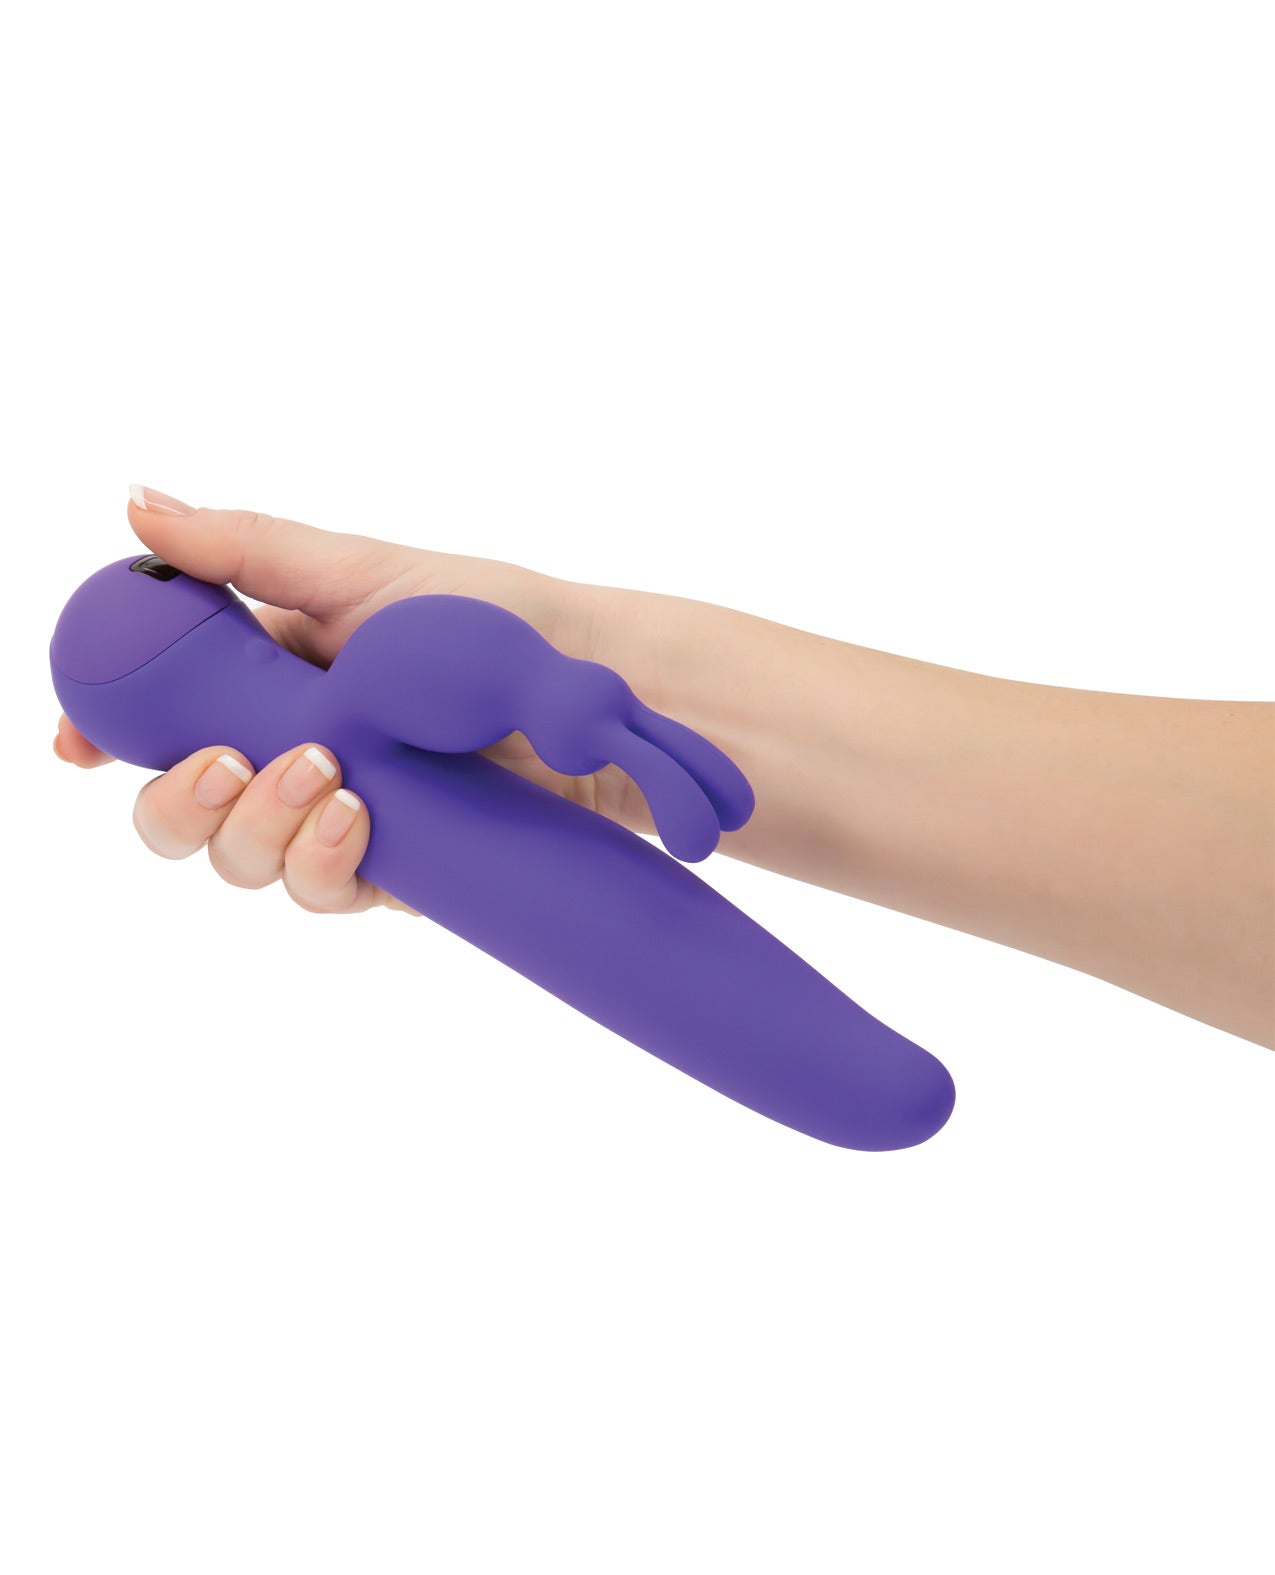 Touch By Swan Duo Rabbit Vibrator - Purple - LUST Depot